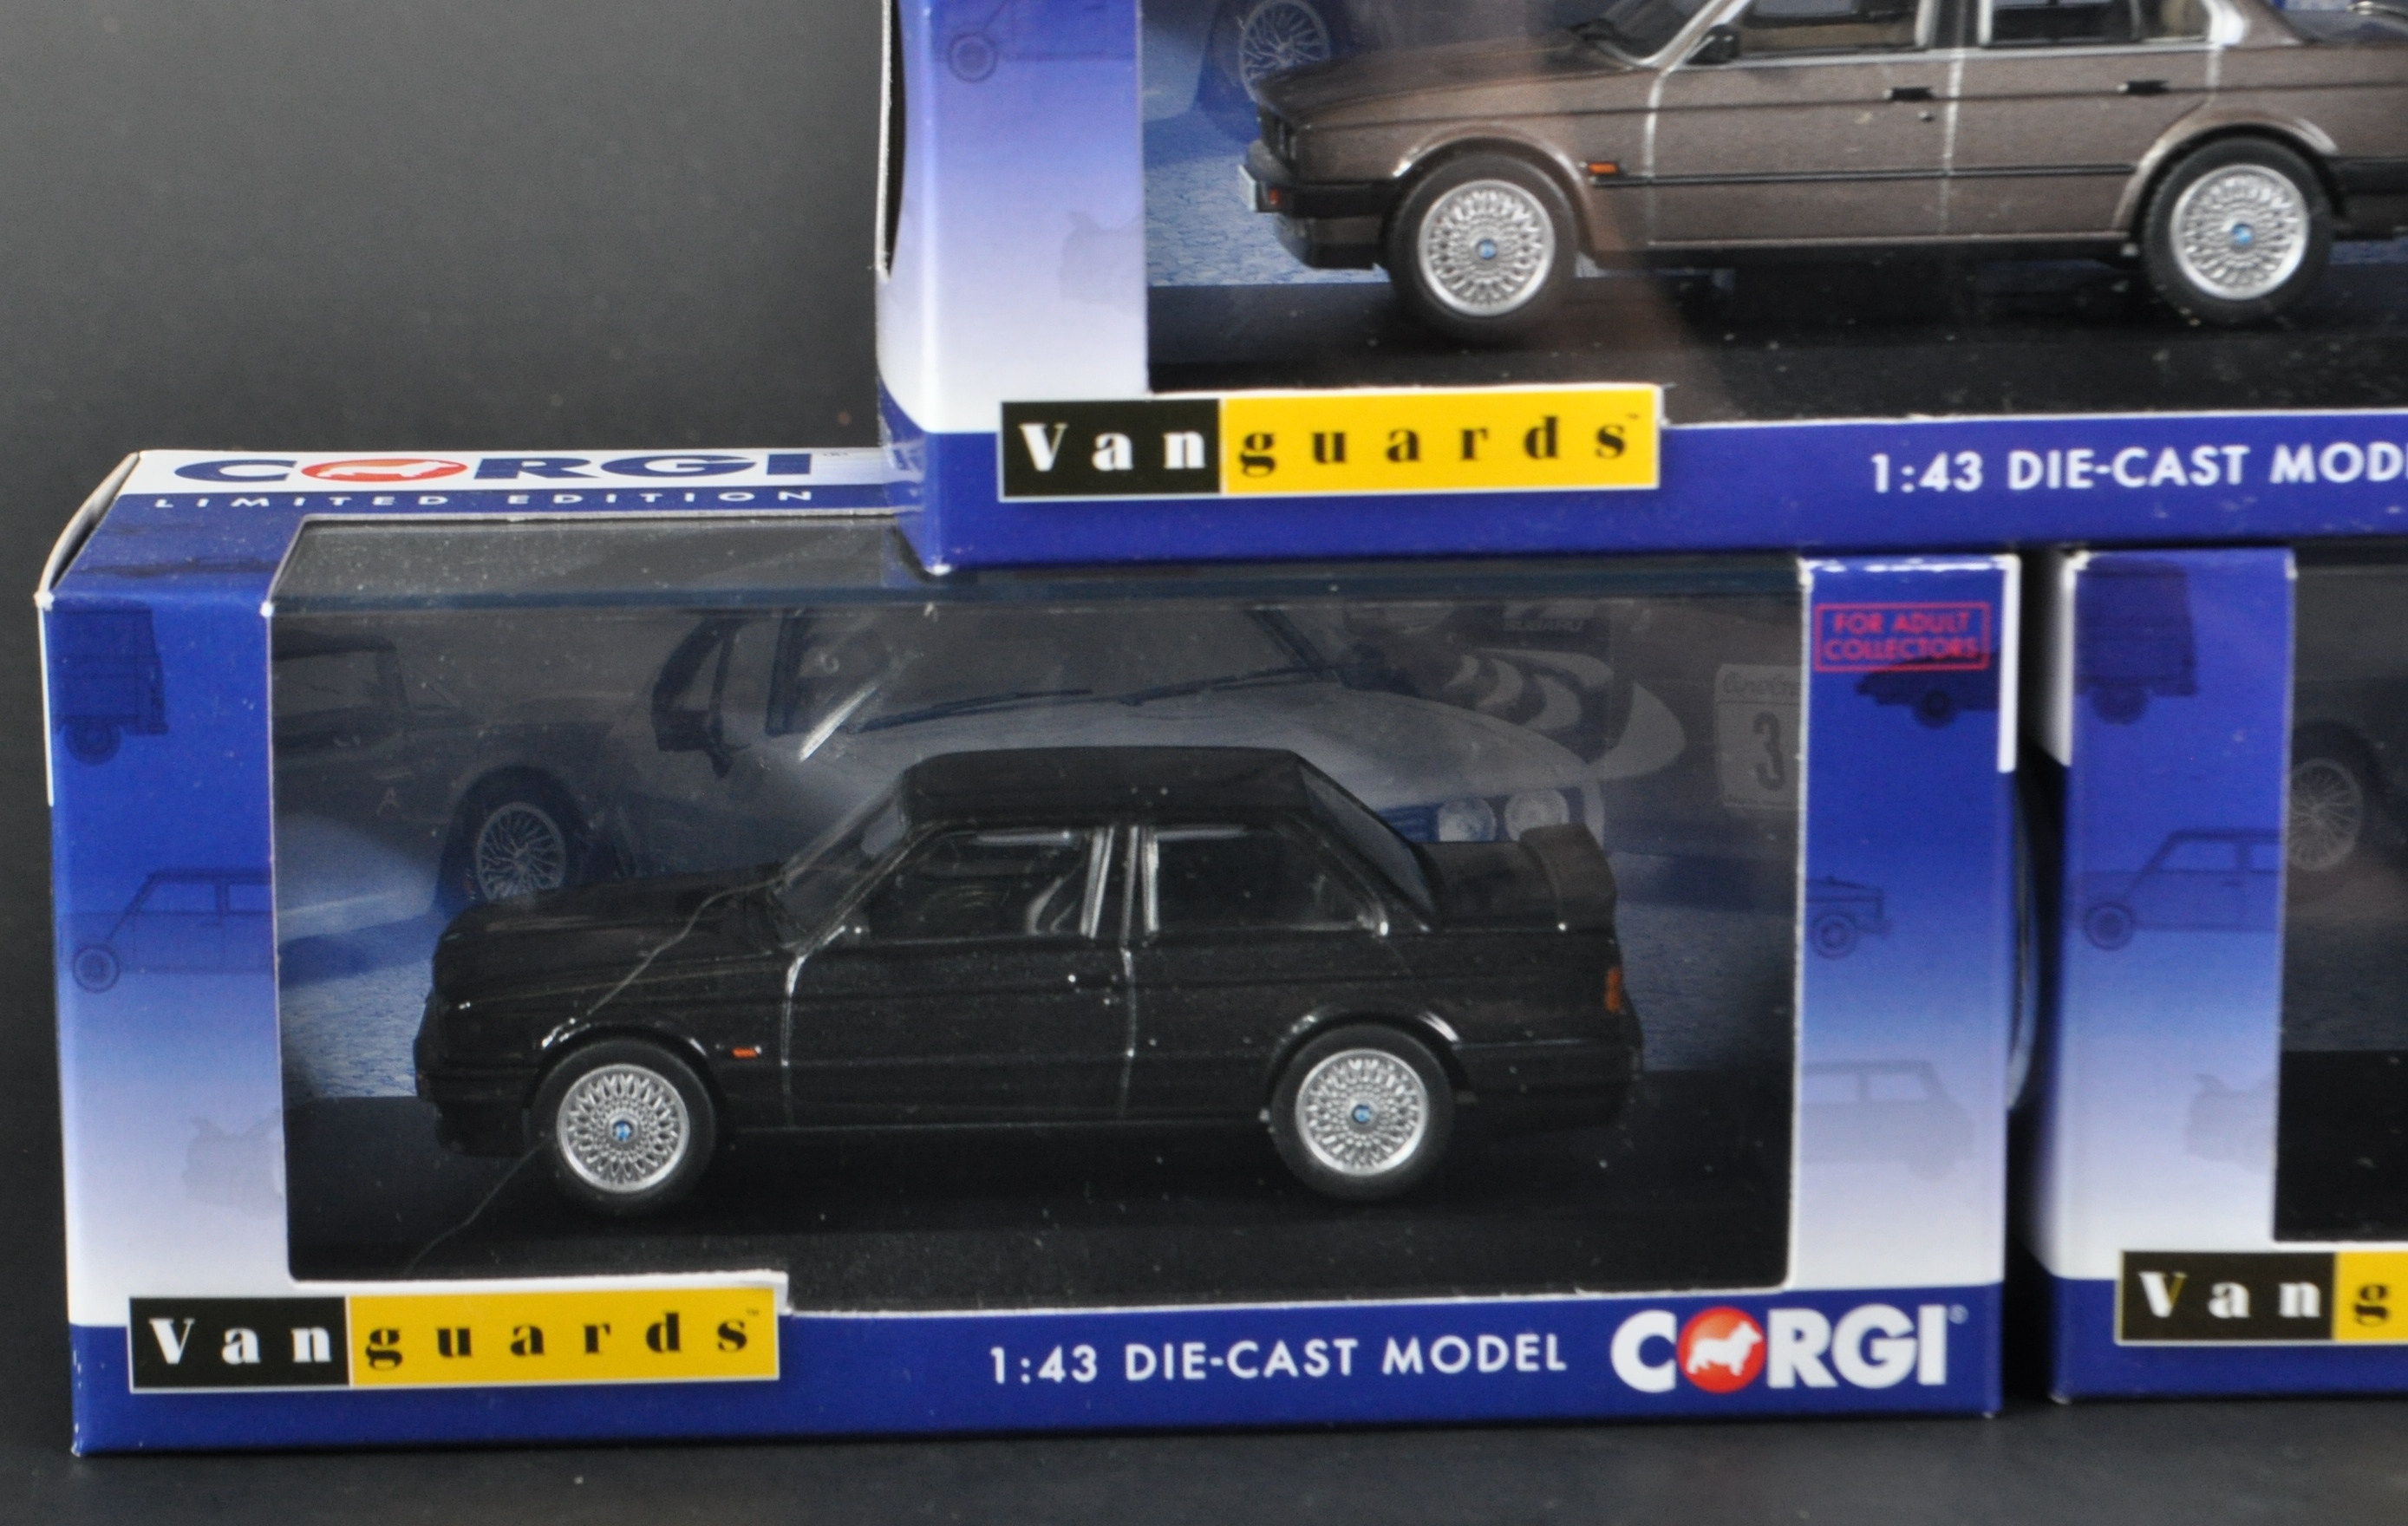 COLLECTION OF CORGI VANGUARDS 1/43 SCALE DIECAST MODEL CARS - Image 2 of 6